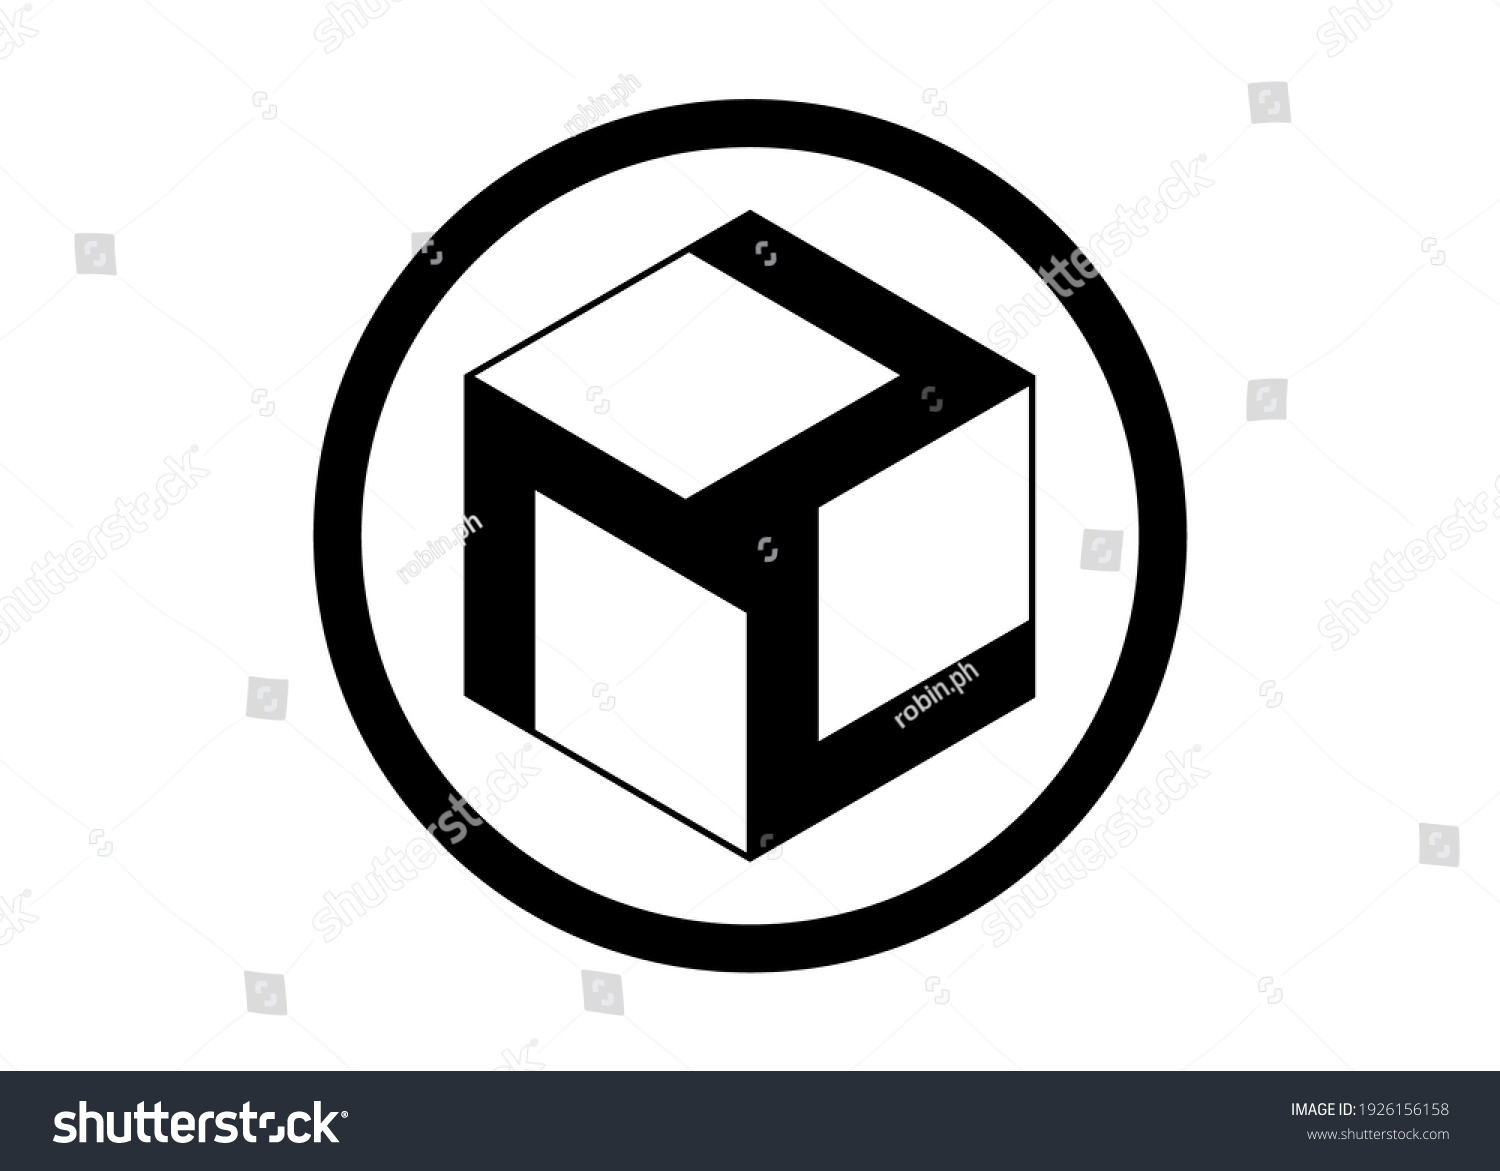 SVG of Antahkarana ancient symbol of Healing and Meditation, used in Tibet and China. Sacred Geometry, mystic sign for Reiki, Radionics, beneficial effects on the chakras, healing energies. Vector isolated svg